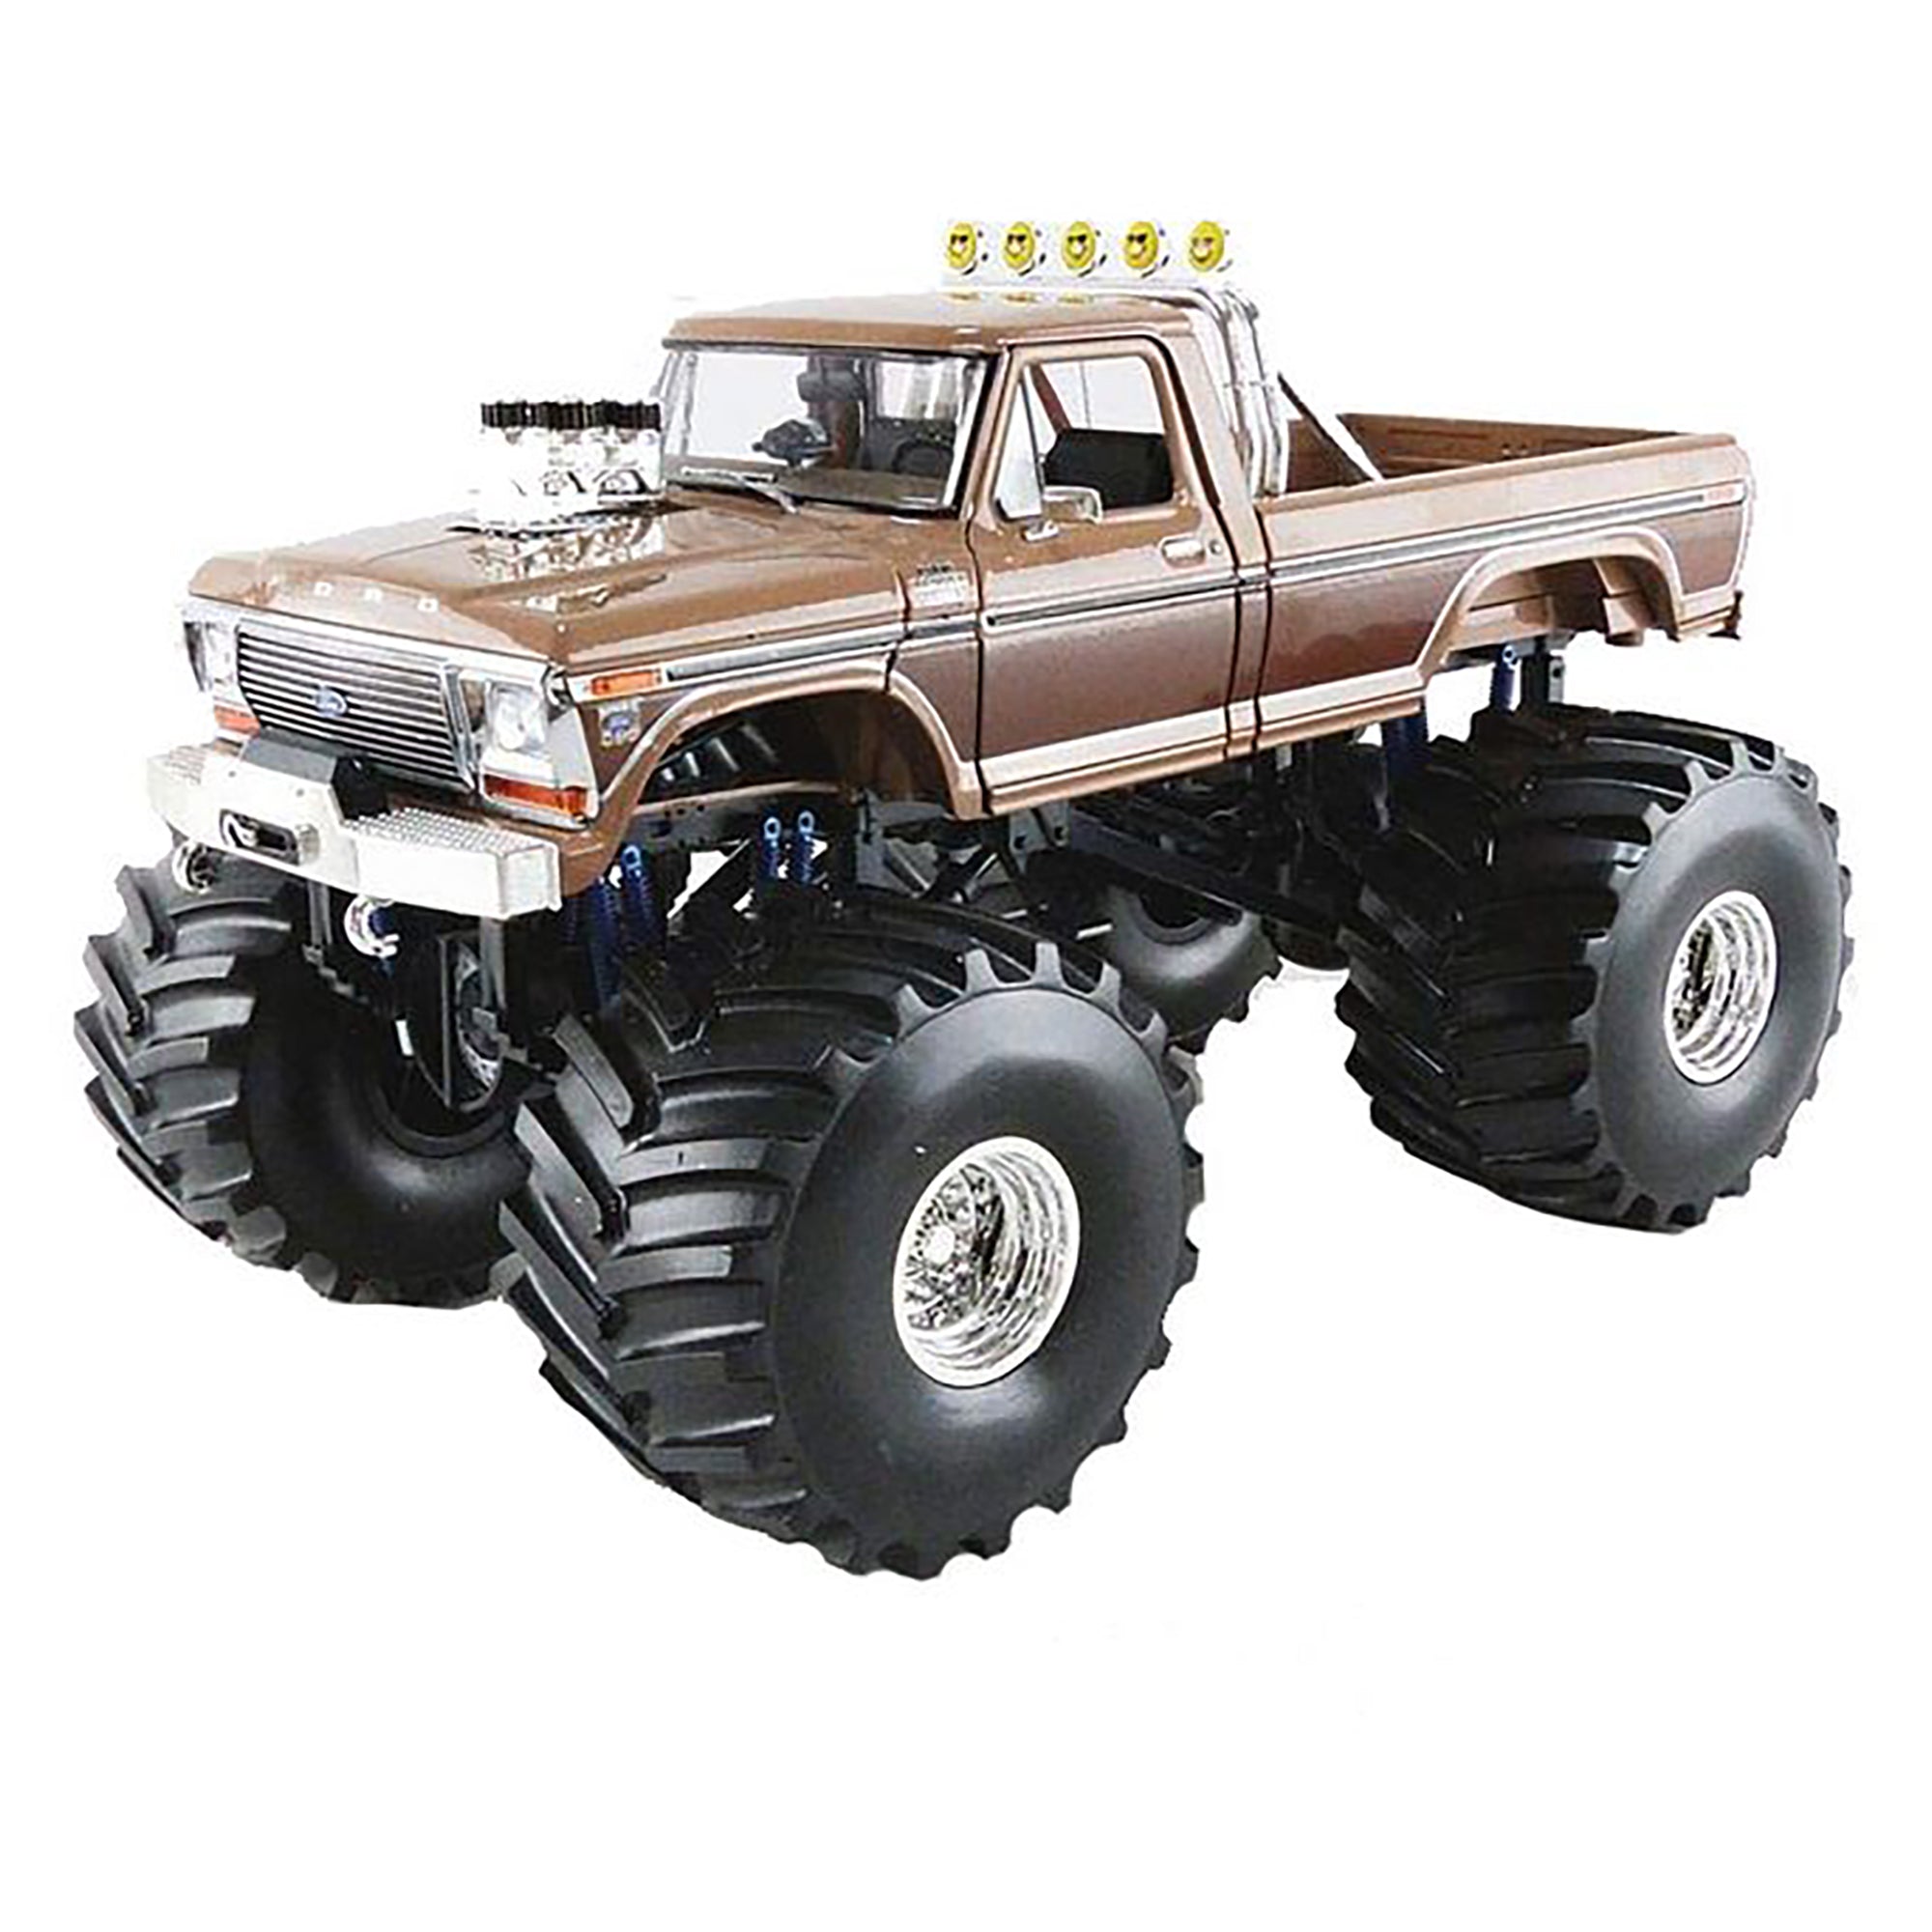 Greenlight 13557 1978 Ford F-350 BFT Diecast Monster Truck 1:18 with 66